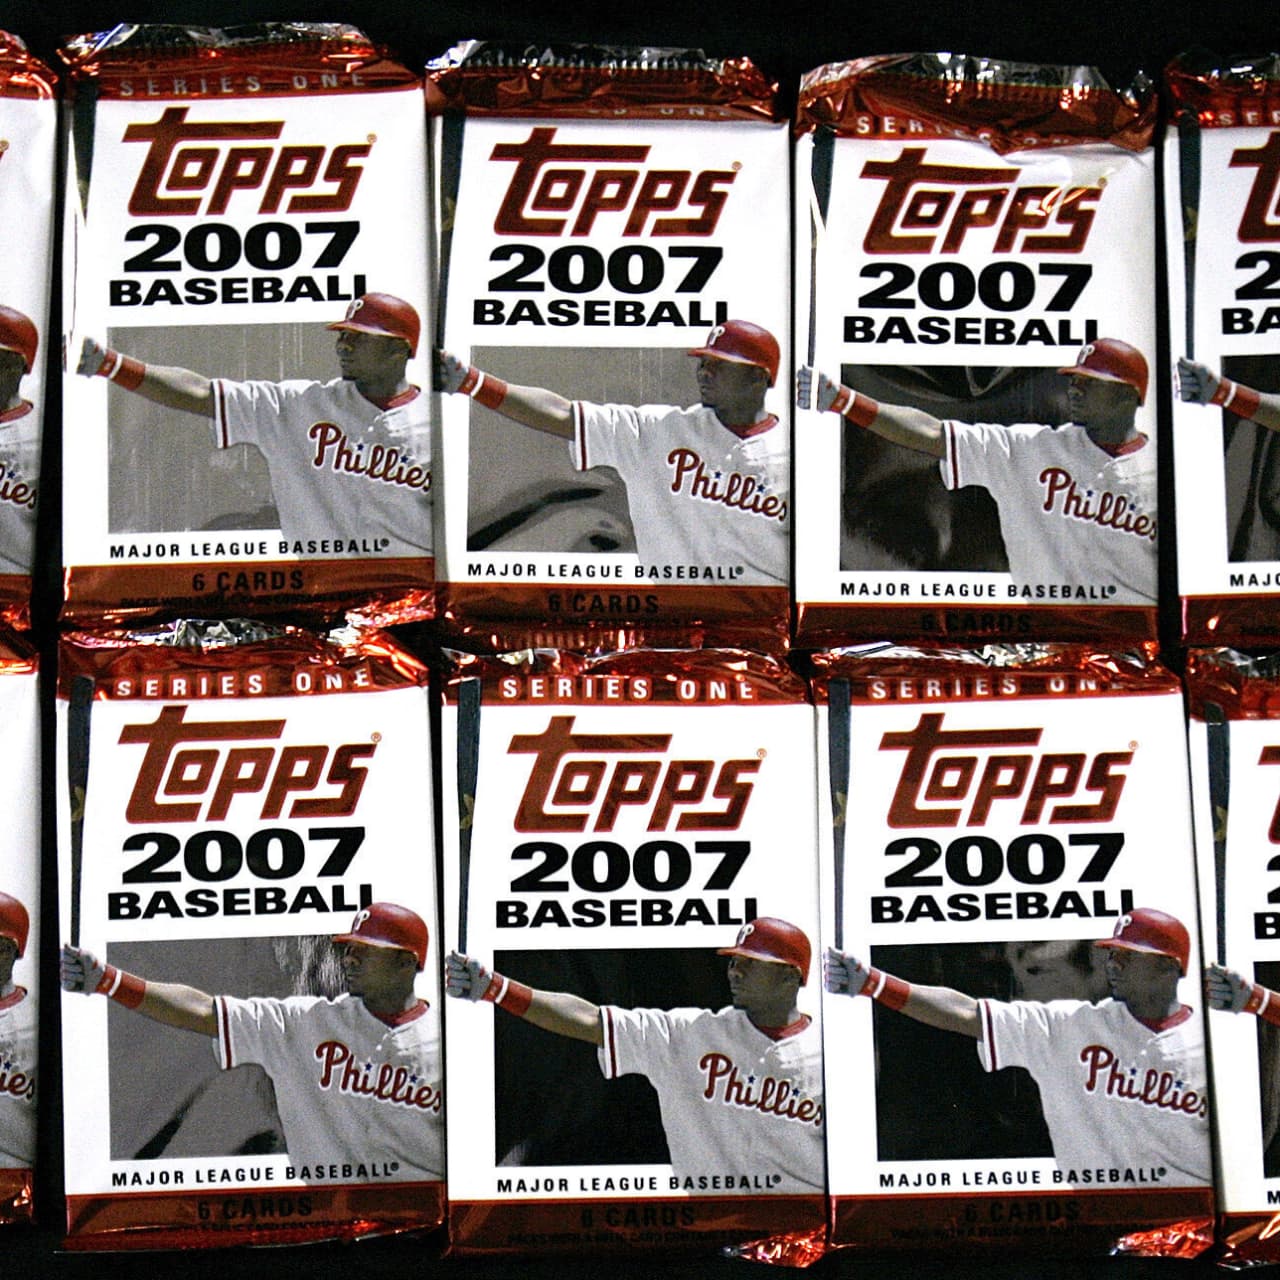 Fanatics to buy iconic trading card company Topps   MarketWatch